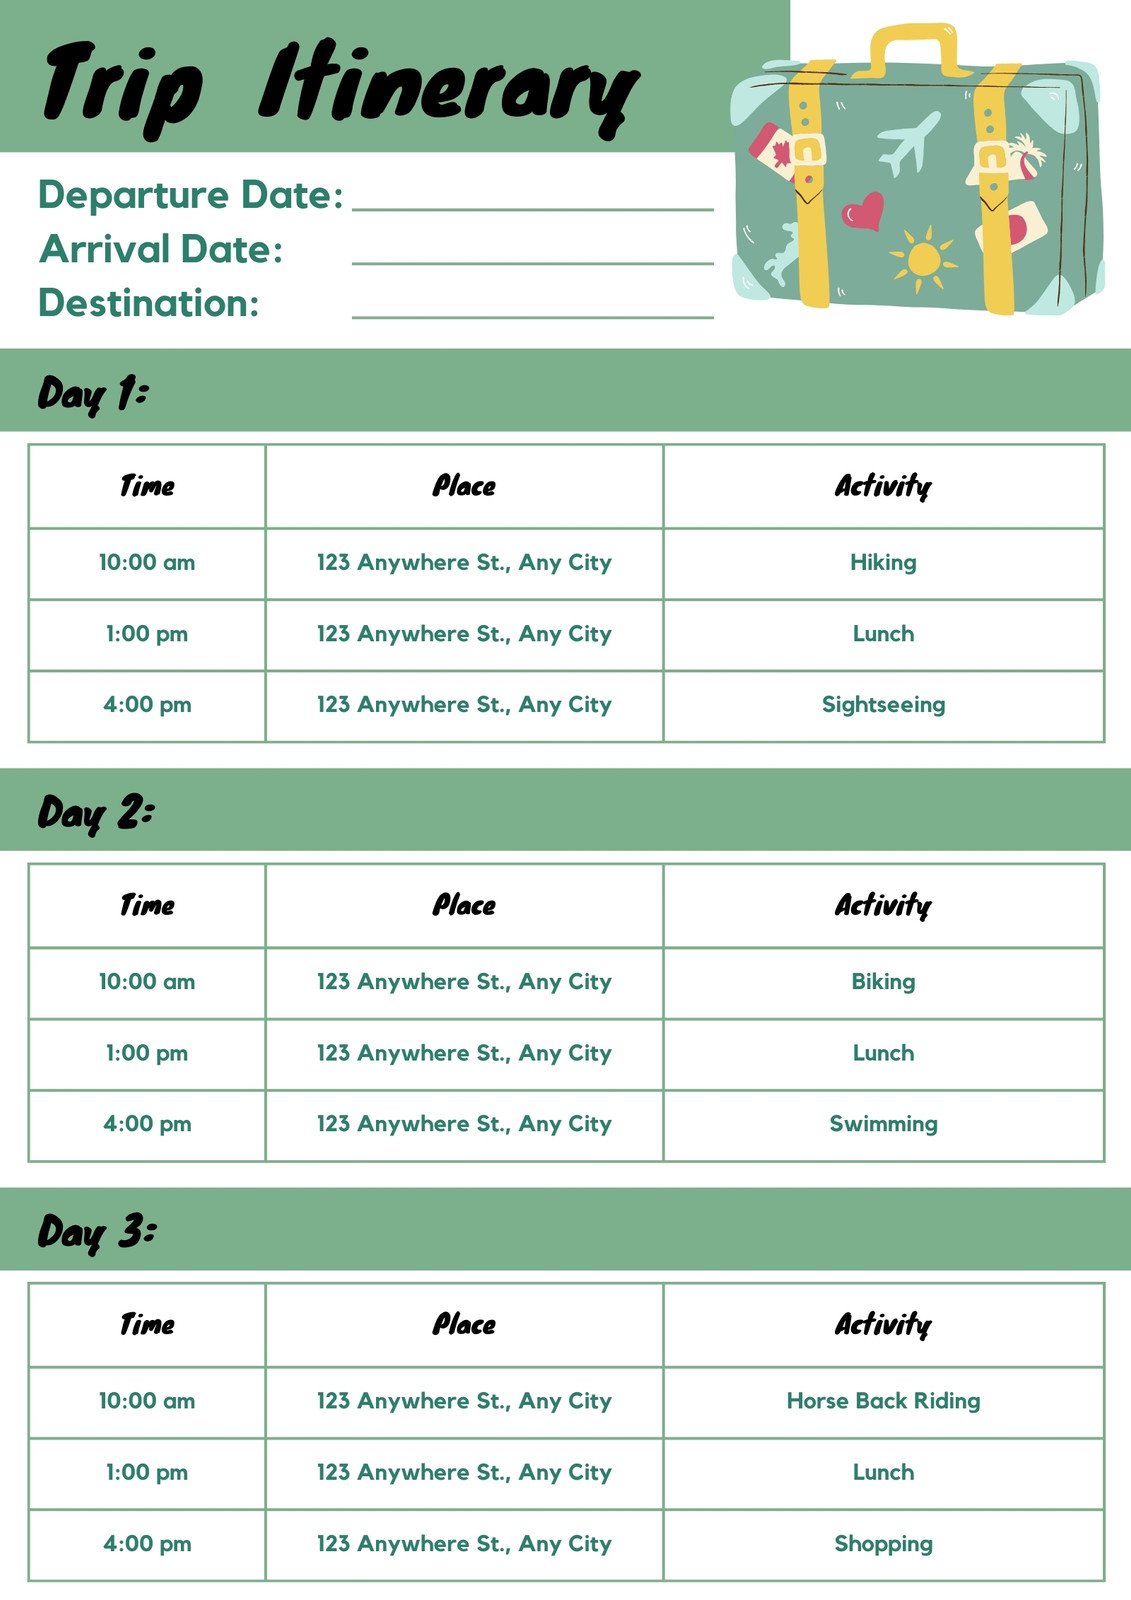 Green and White Trip Itinerary Timeline Planner